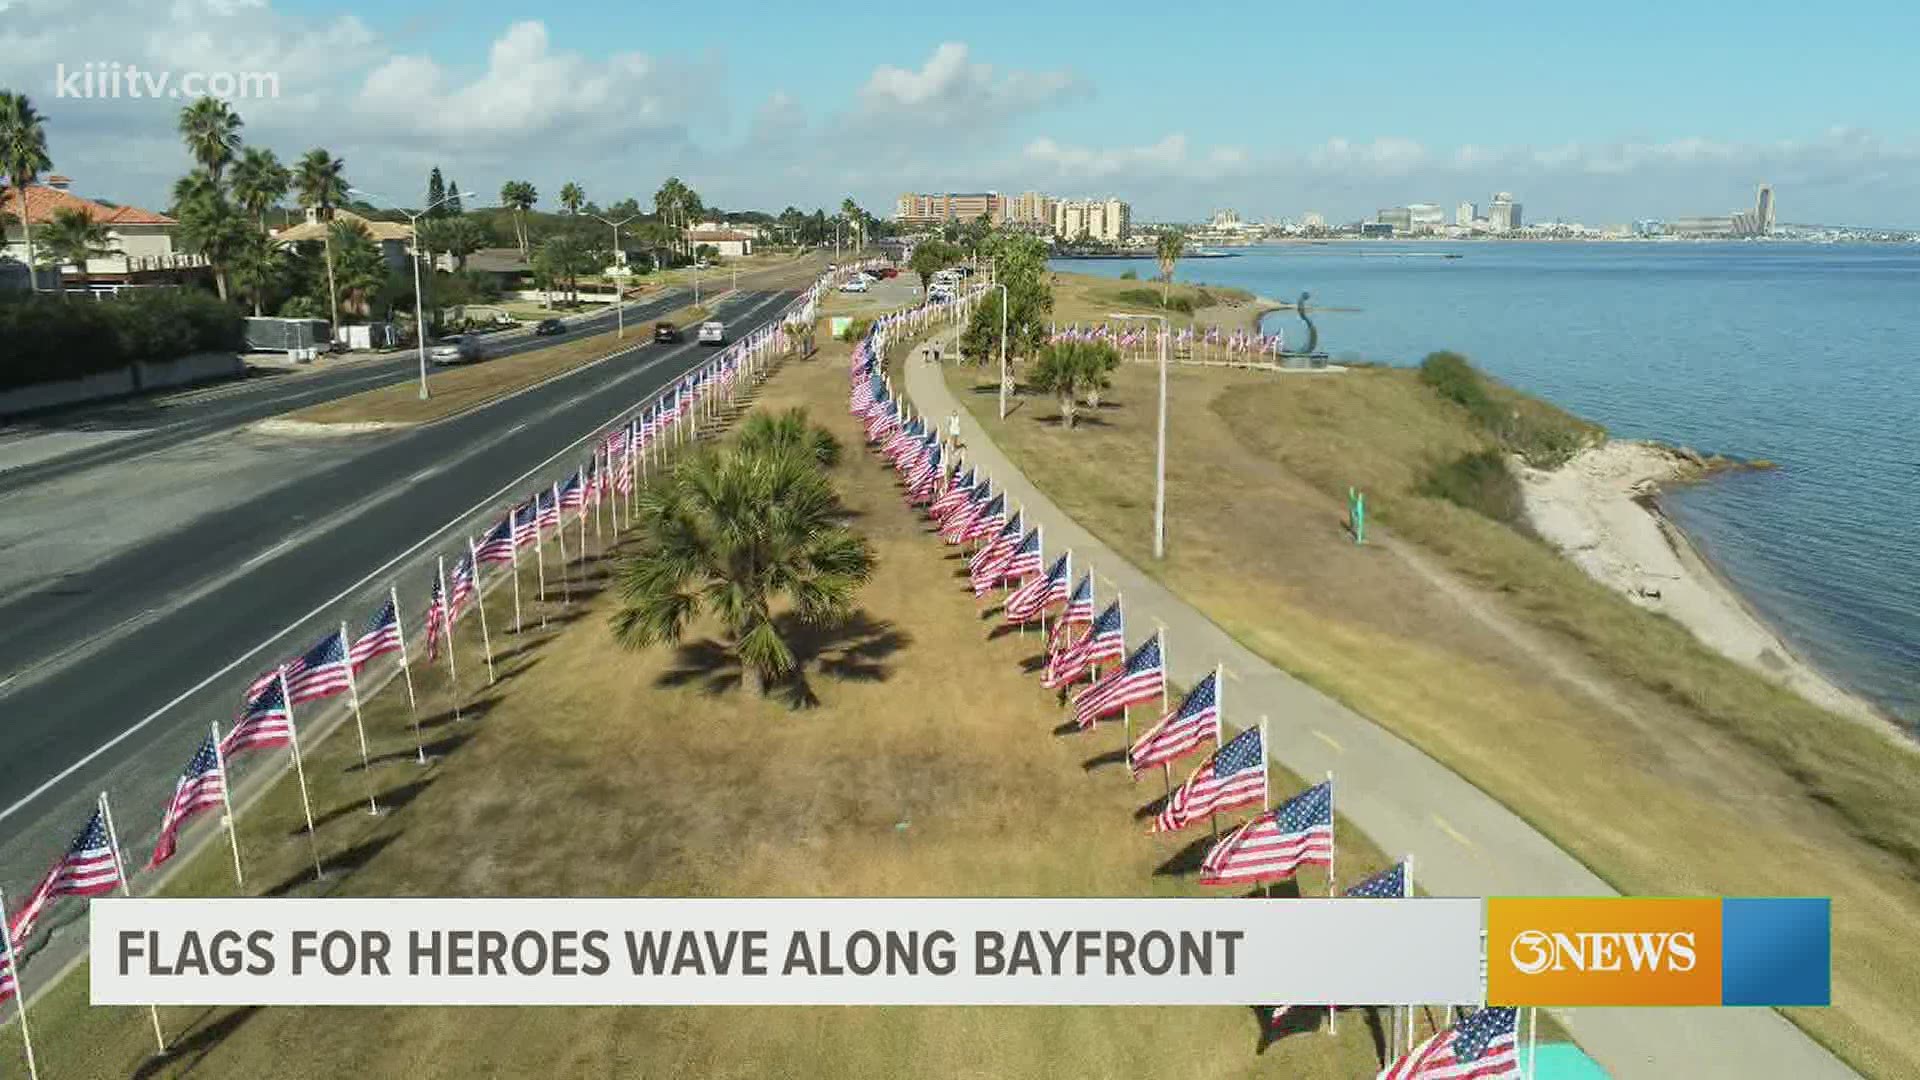 1,250 American flags will be waving in the breeze along the bayfront from now until Sunday.